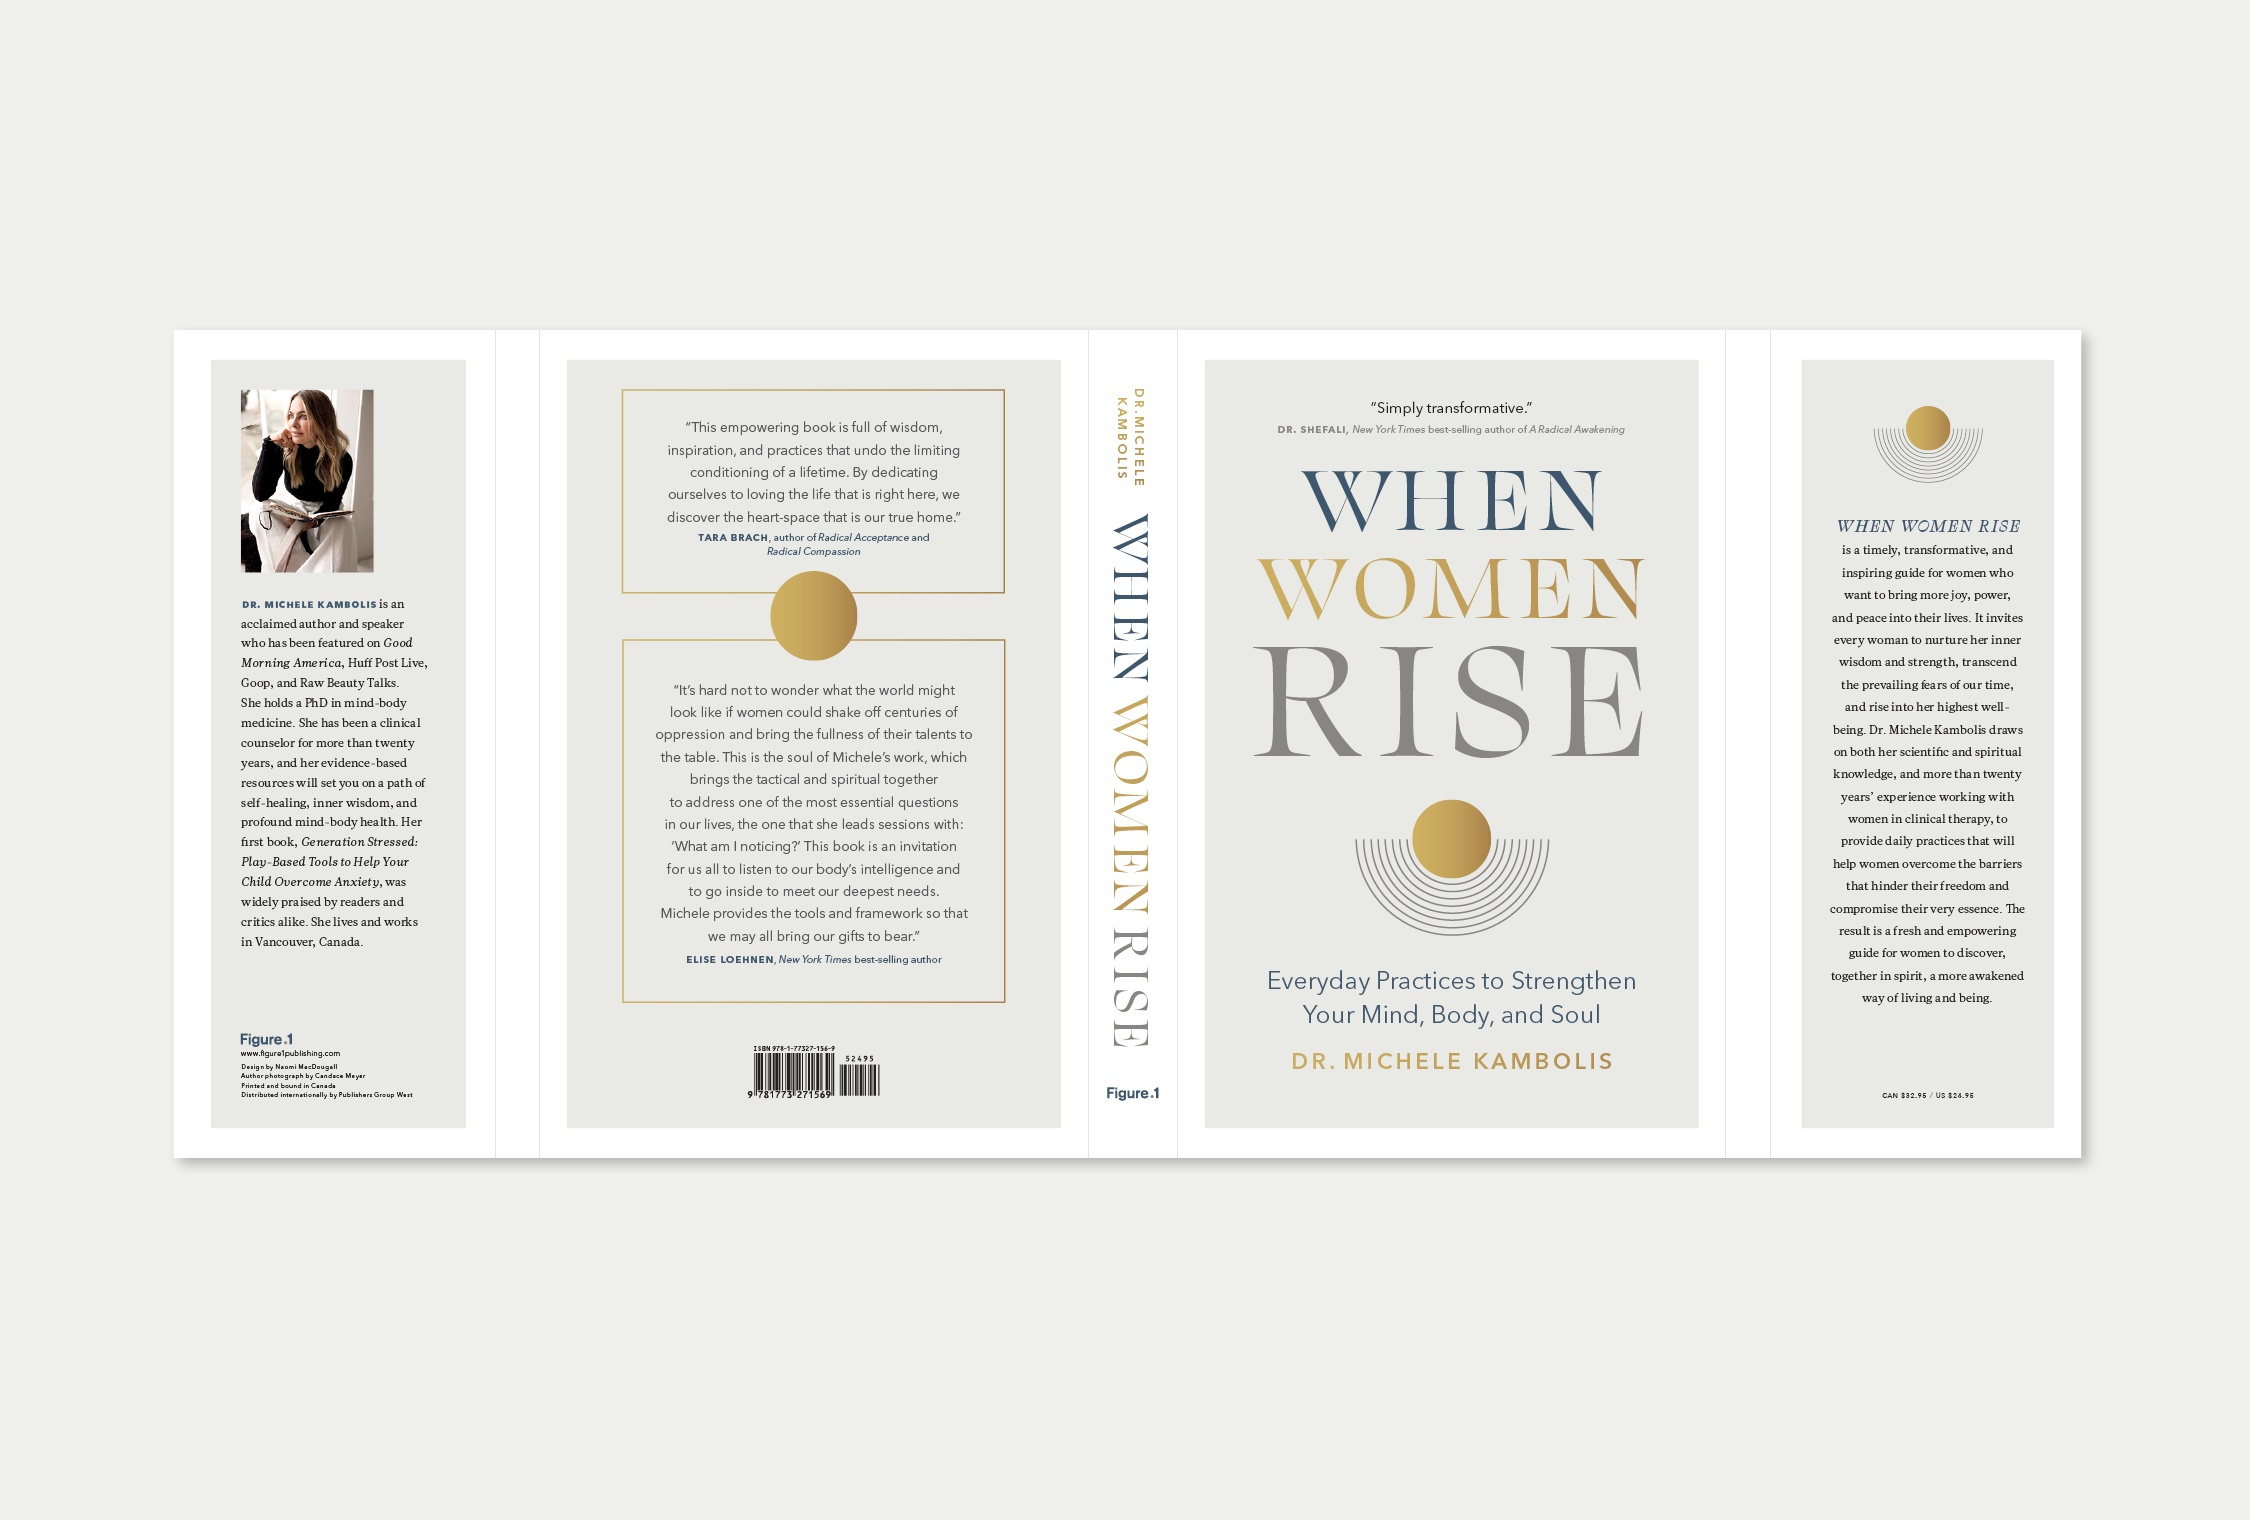 Full book jacket showing front and back flaps, back cover and front cover, laid out flat